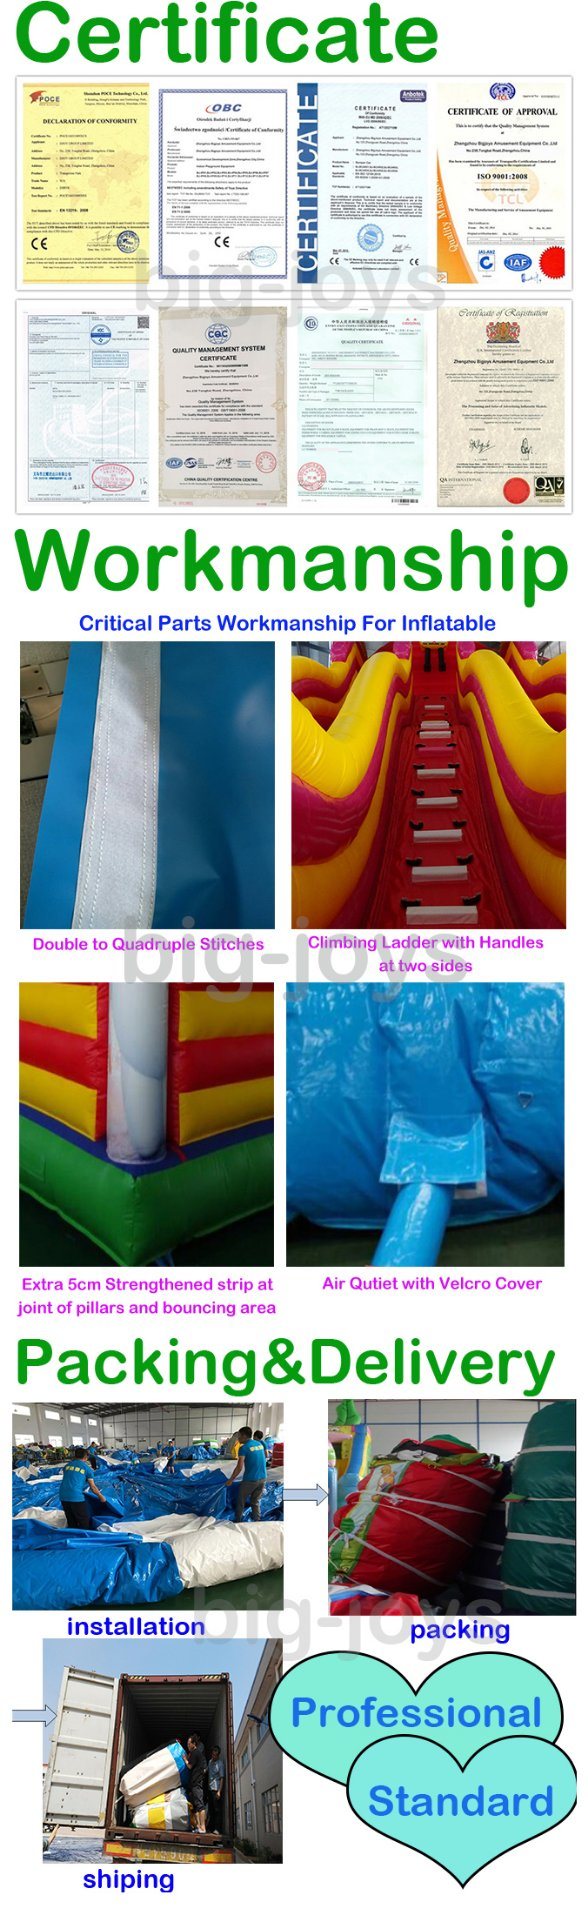 Best Sell Giant Inflatable Bouncer, Inflatable Product (BJ-B11)